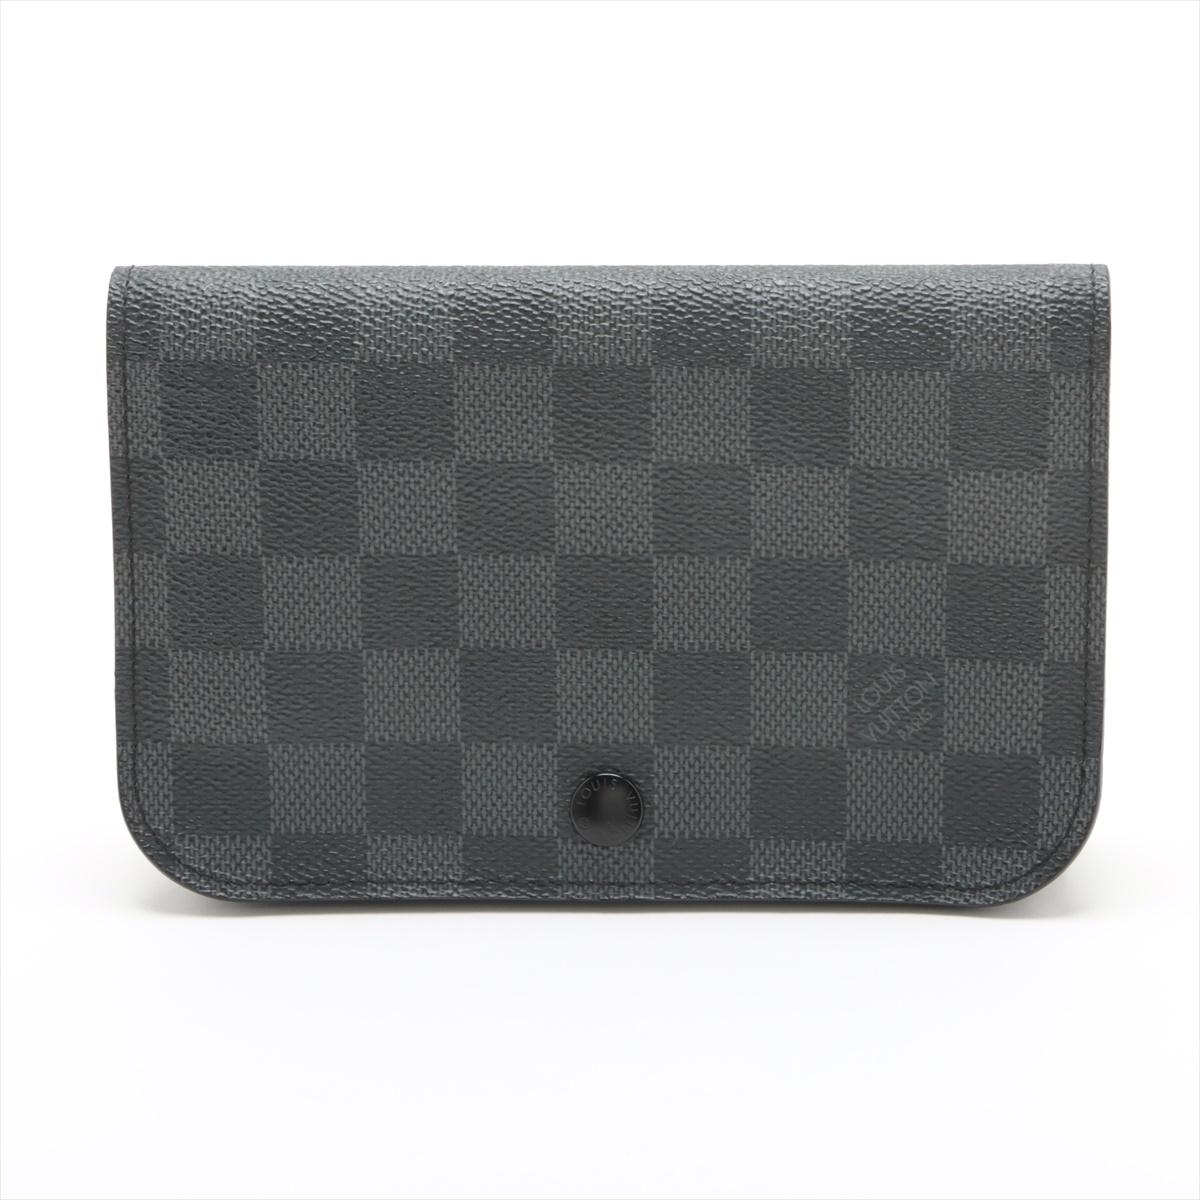 The Louis Vuitton Damier Graphite Pochette Homme is a sleek and contemporary accessory that combines practicality with modern style. Crafted with precision, the pouch features the iconic Damier Graphite canvas, offering a subtle and sophisticated